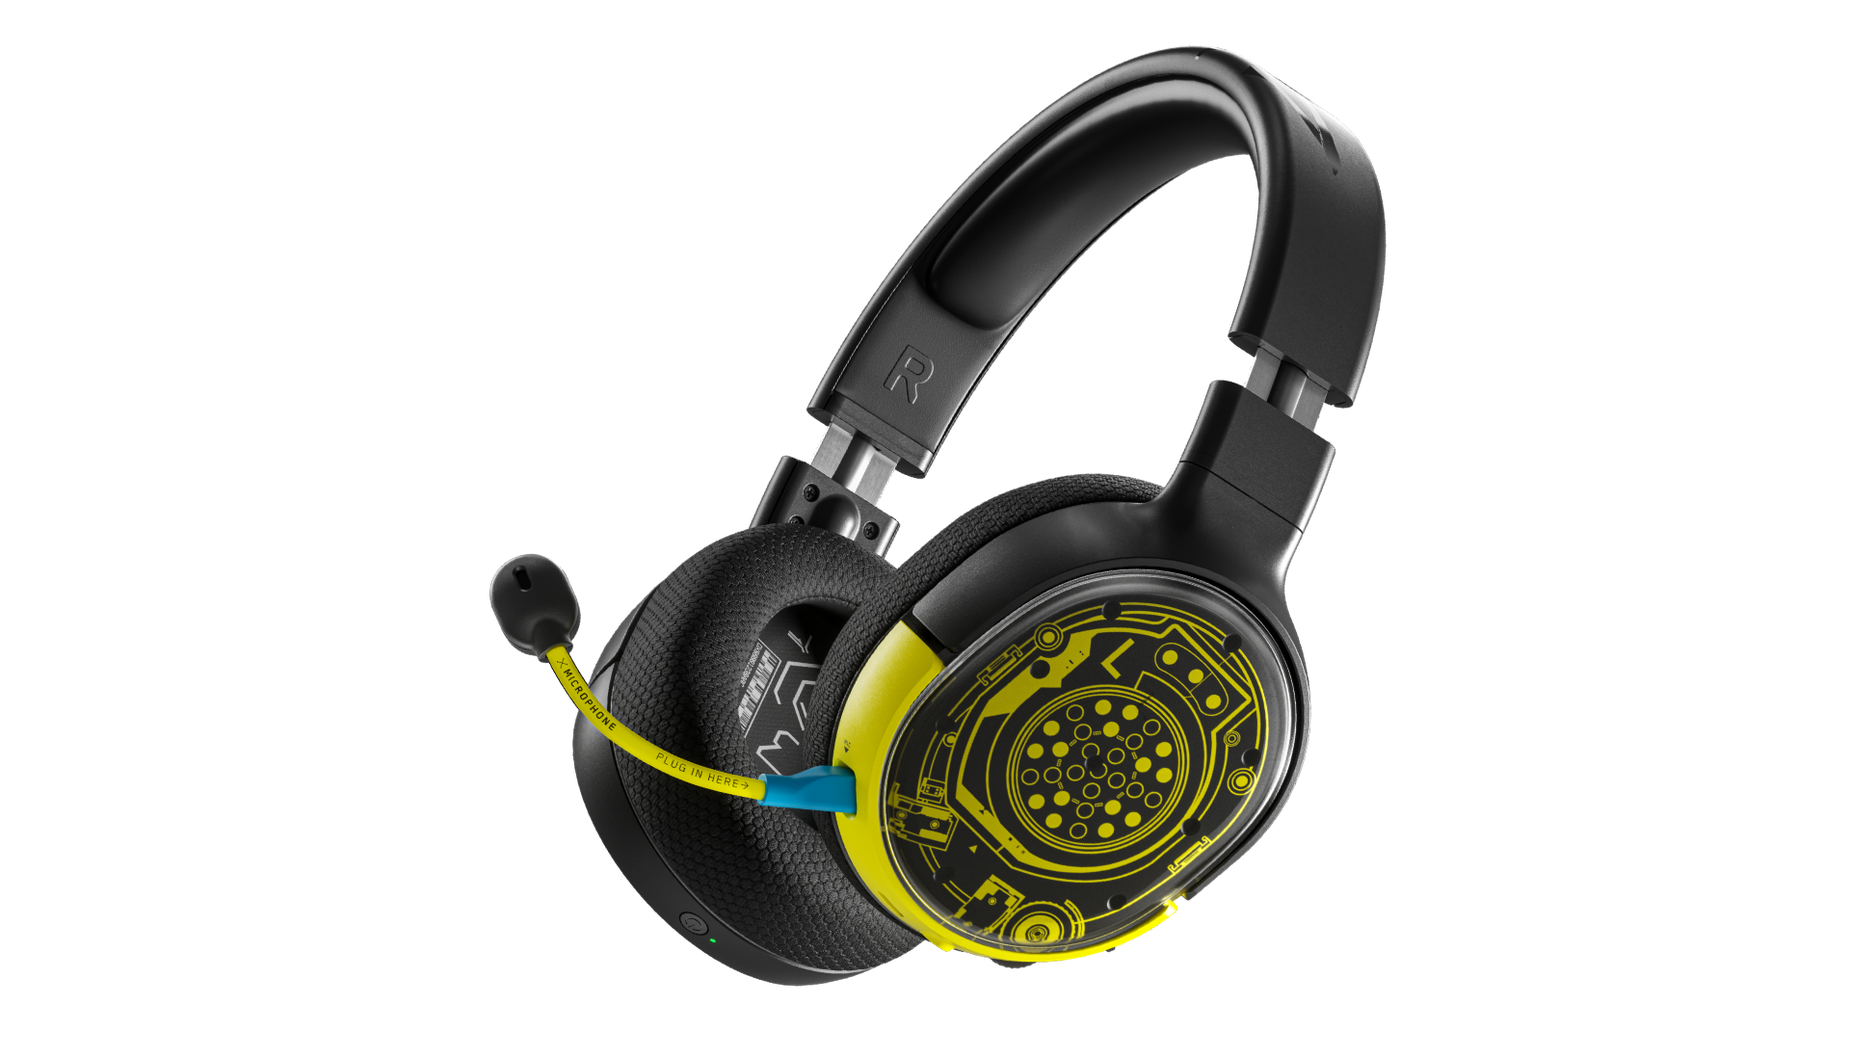 Steelseries Reveals New Arctis 1 Wireless Cyberpunk 77 Themed Headsets For Xbox And Ps4 Switch Pc And Android Notebookcheck Net News